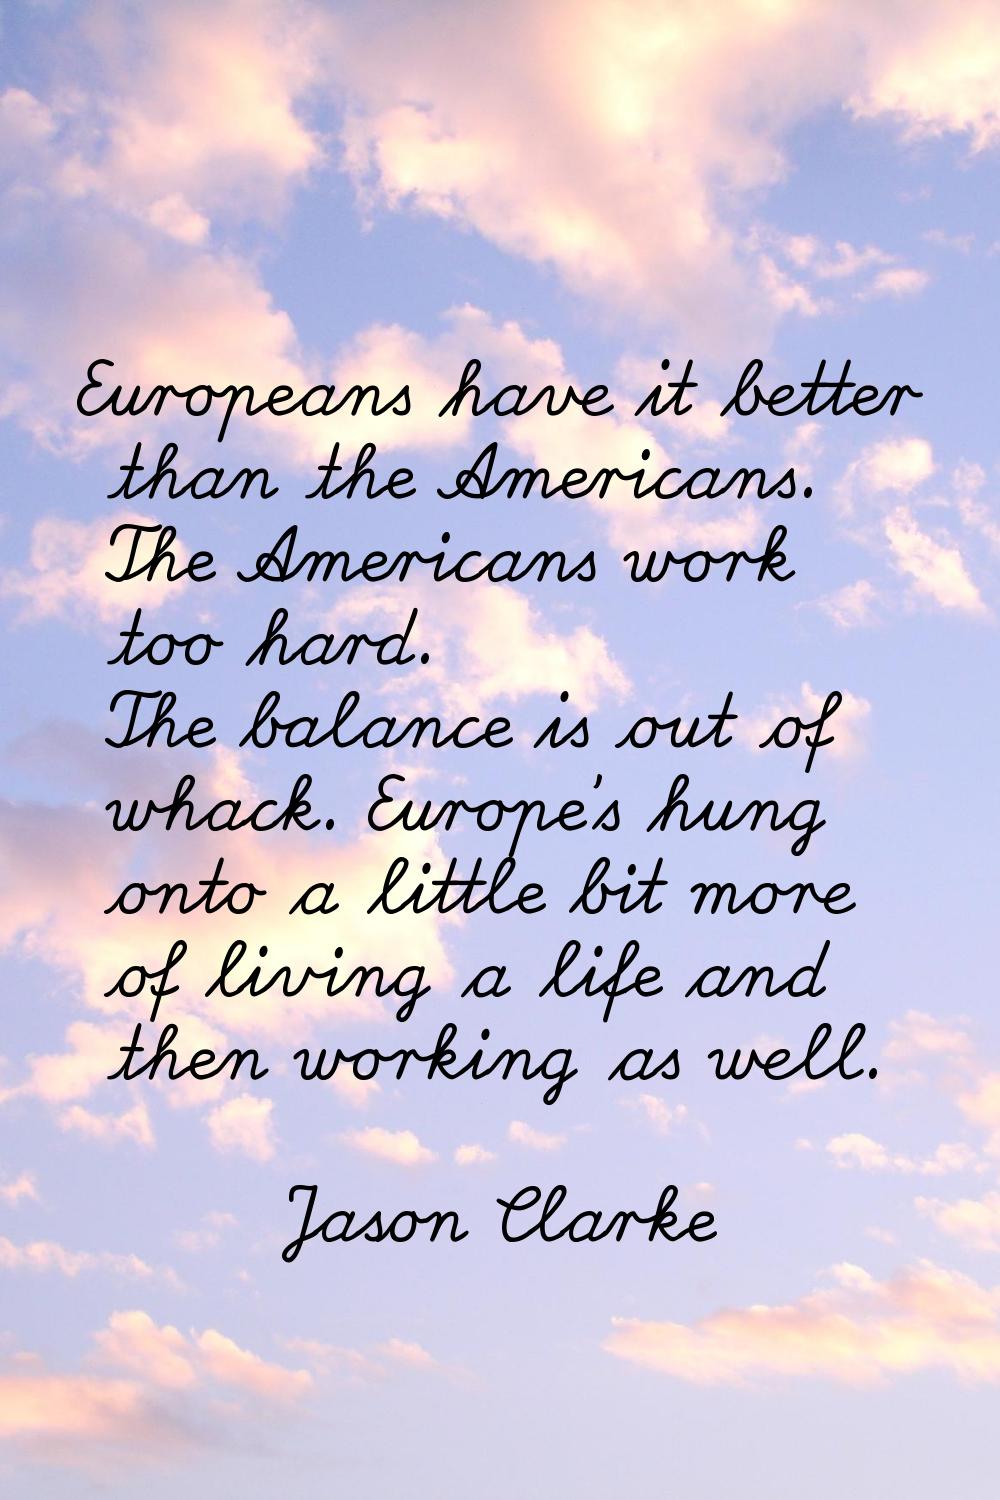 Europeans have it better than the Americans. The Americans work too hard. The balance is out of wha